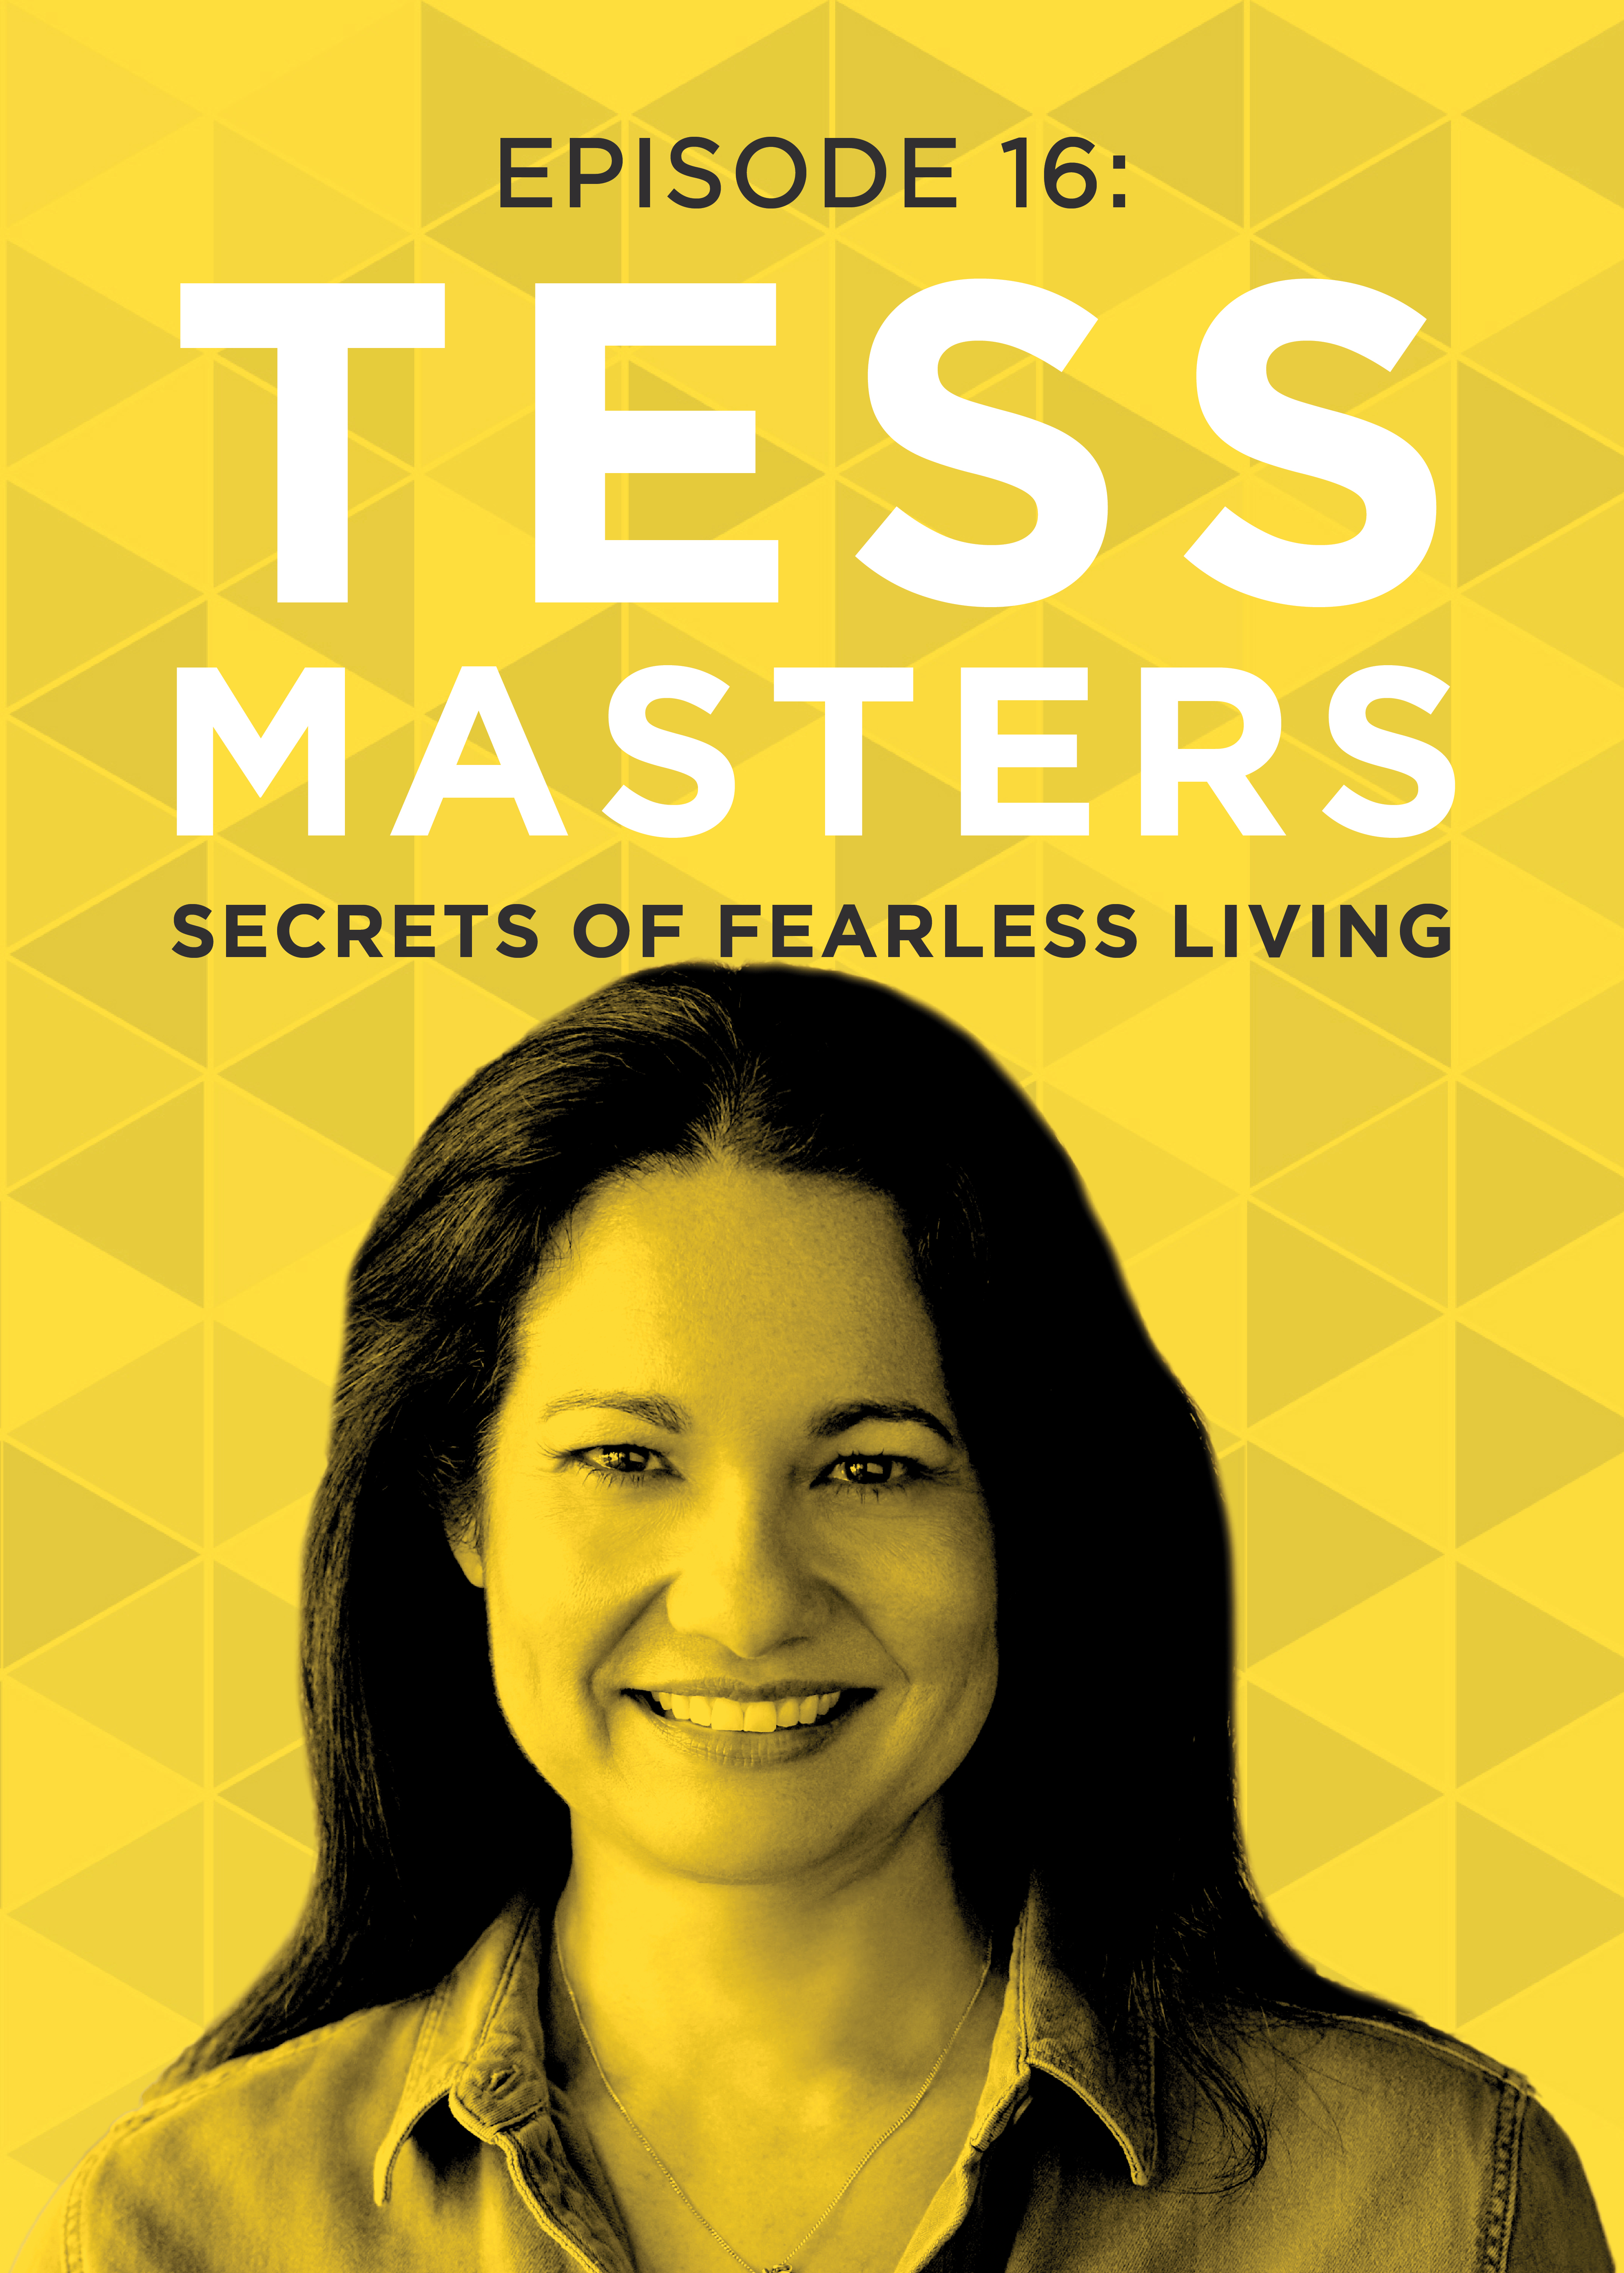 EP 16: Secrets of Fearless Living with Tess Masters